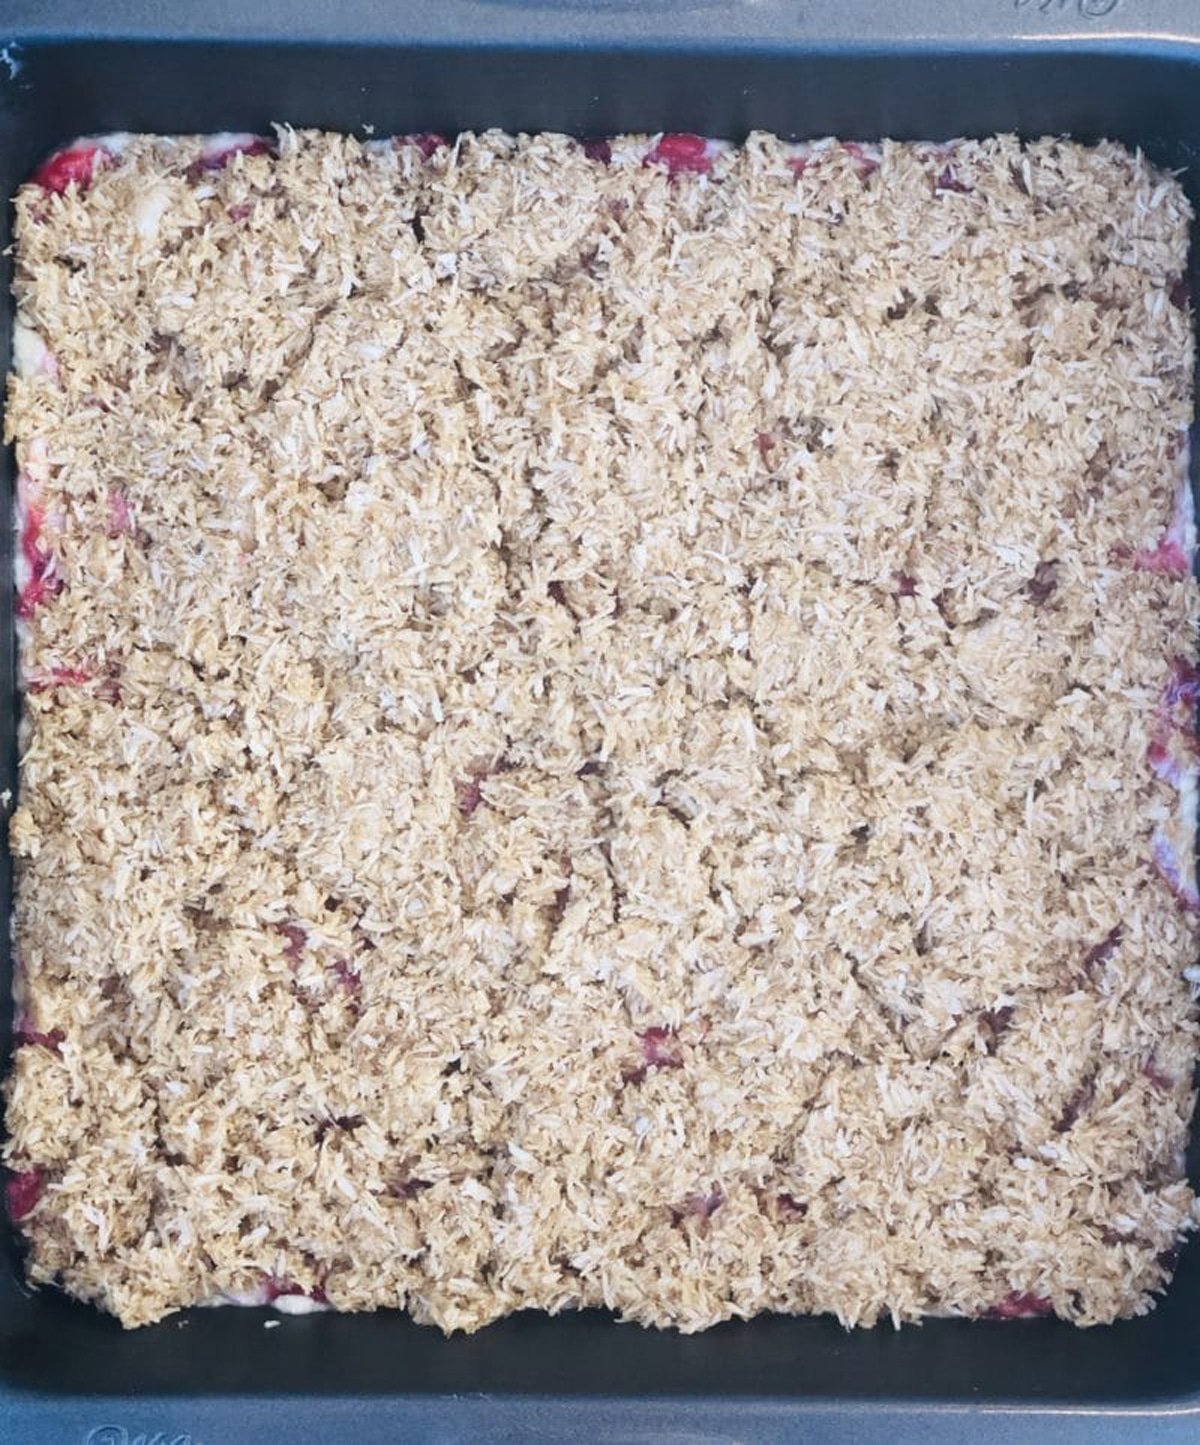 Coconut and sugar spread evenly over raspberry crumble bars before baking.